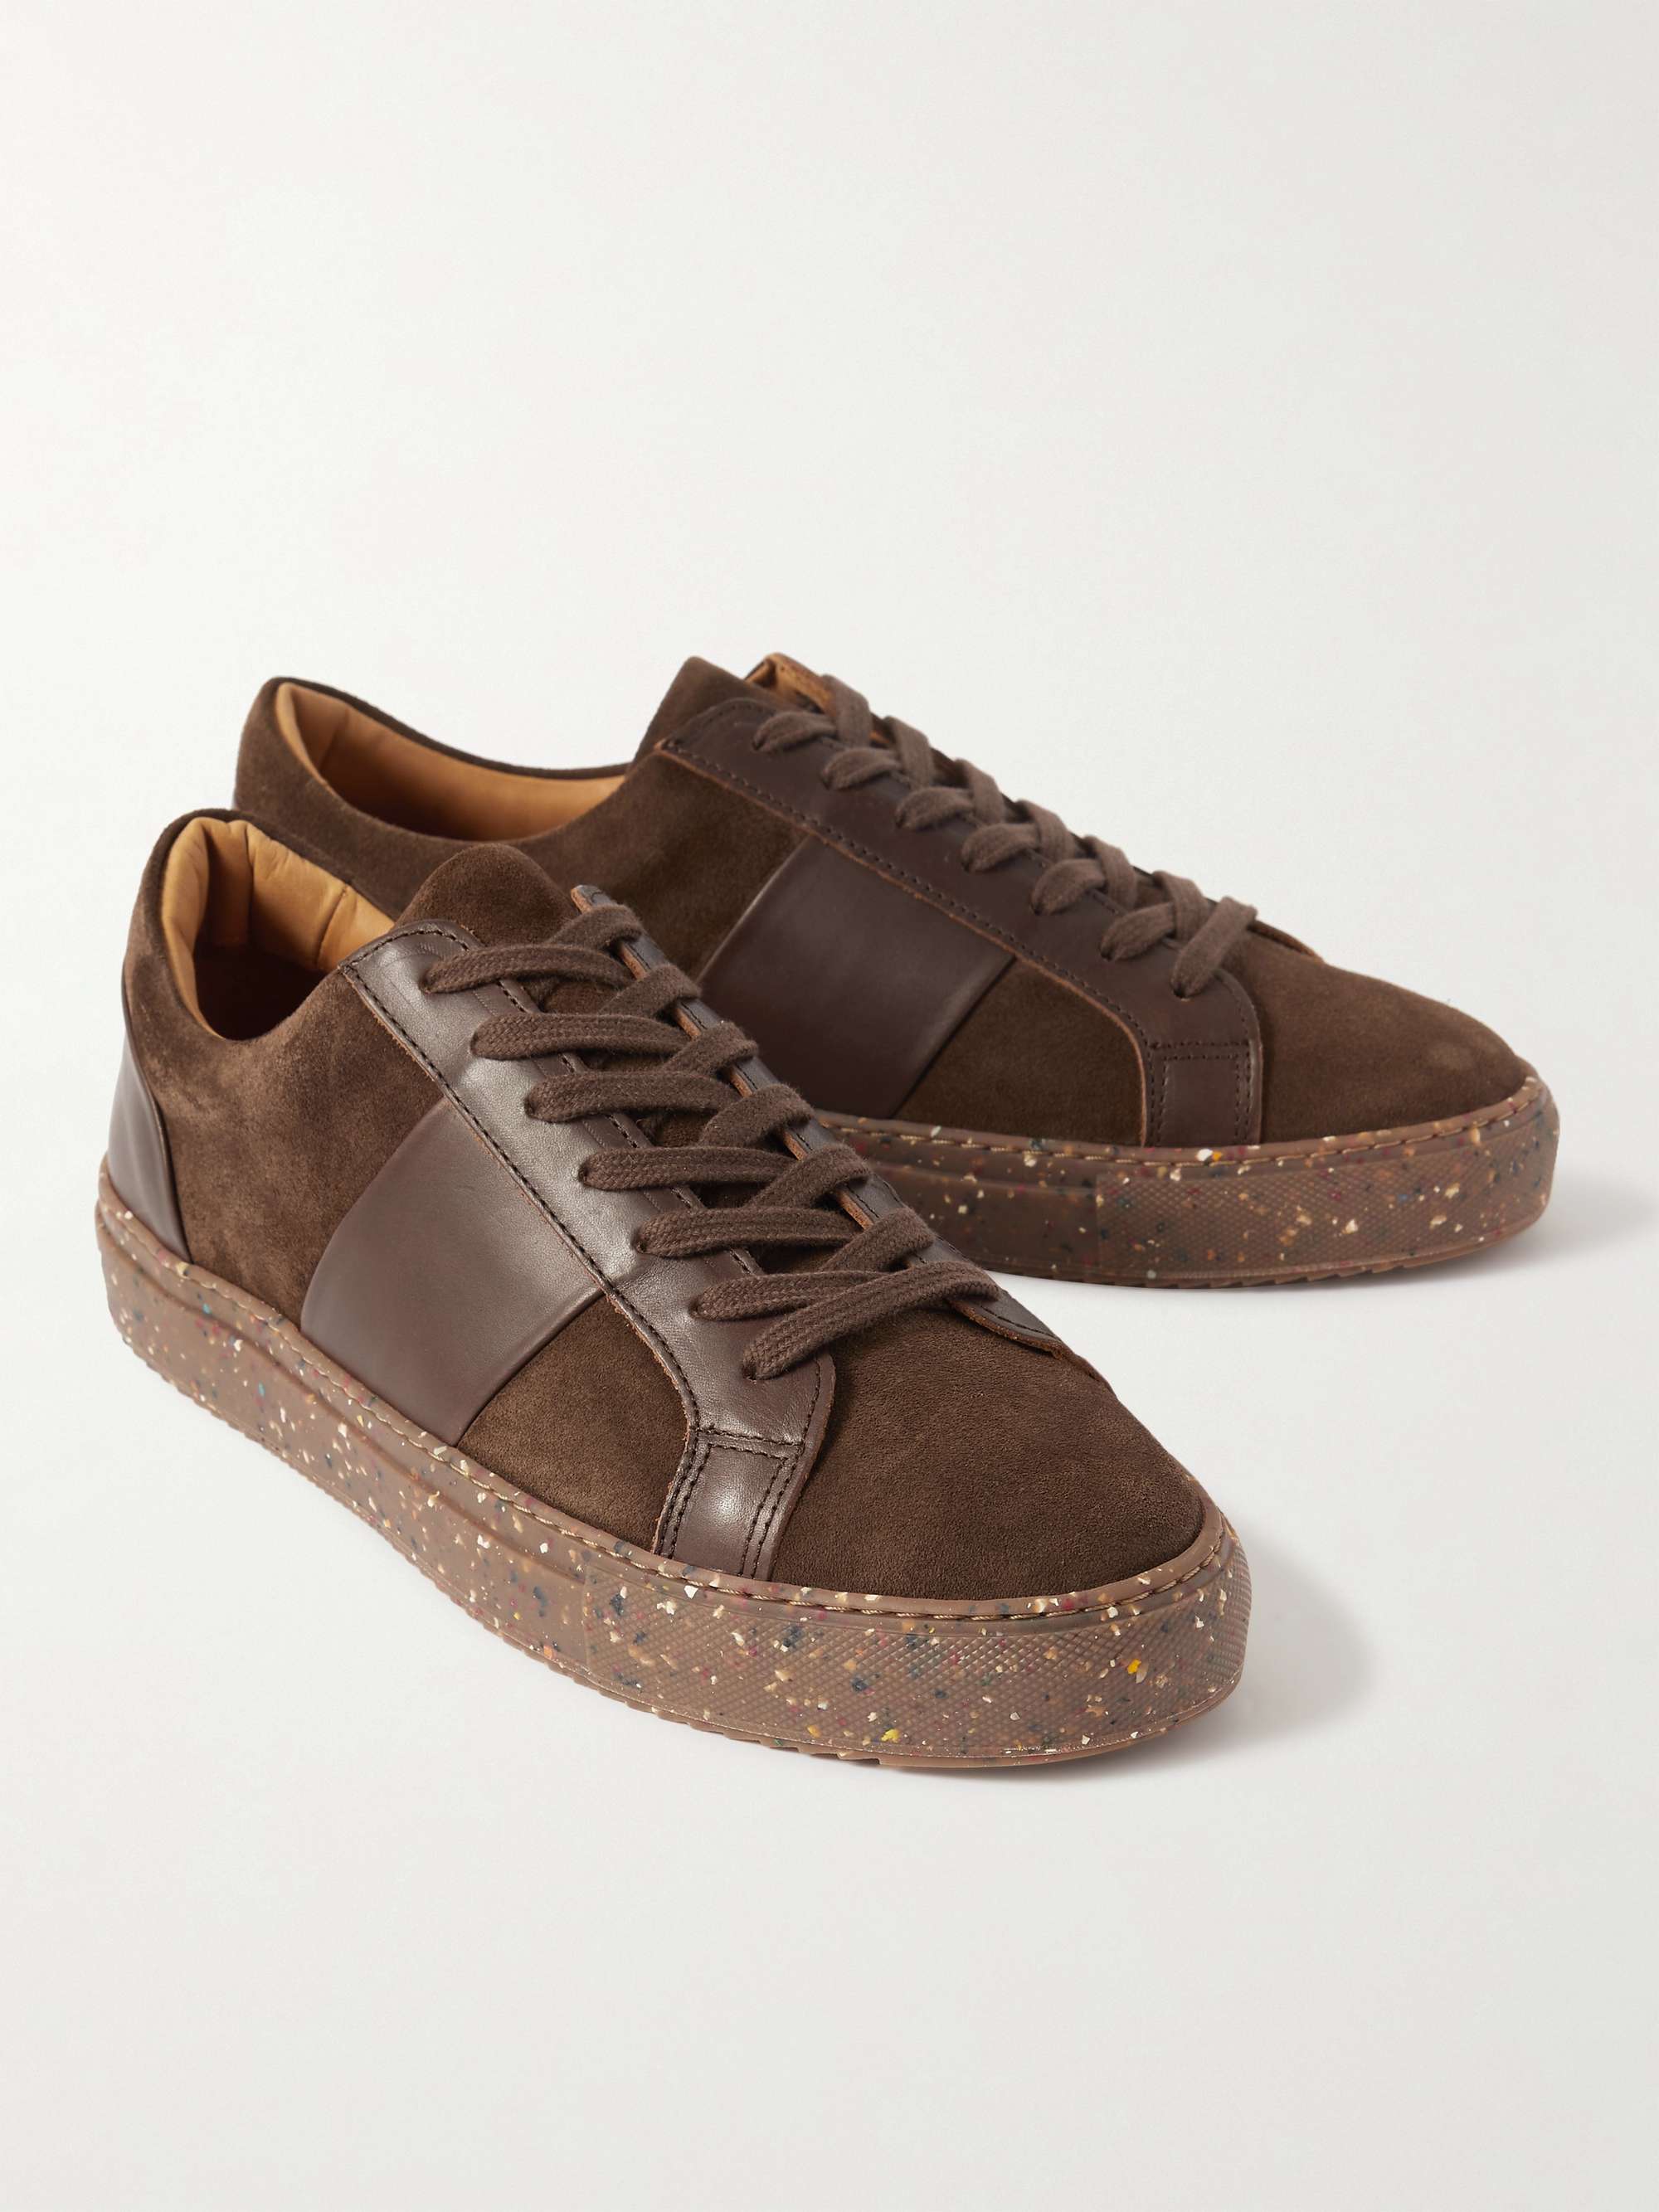 MR P. Larry Leather-Panelled Re-Suede by Evolo Sneakers